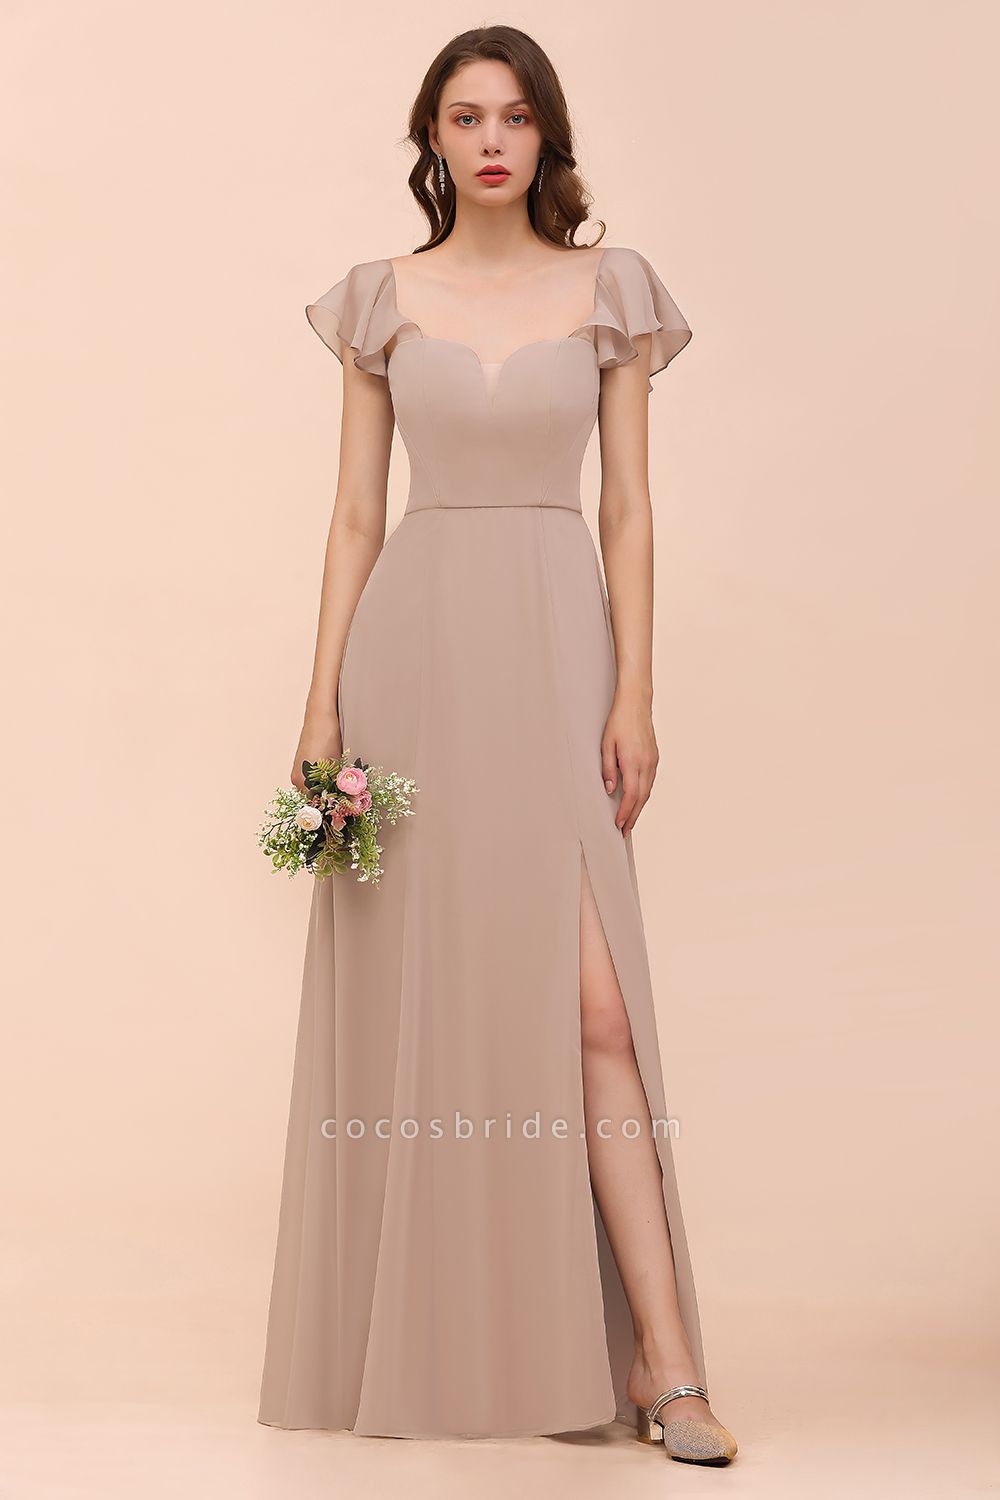 Elegant Long A-line Square Front Slit Chiffon Bridesmaid Dress with Cap Sleeves